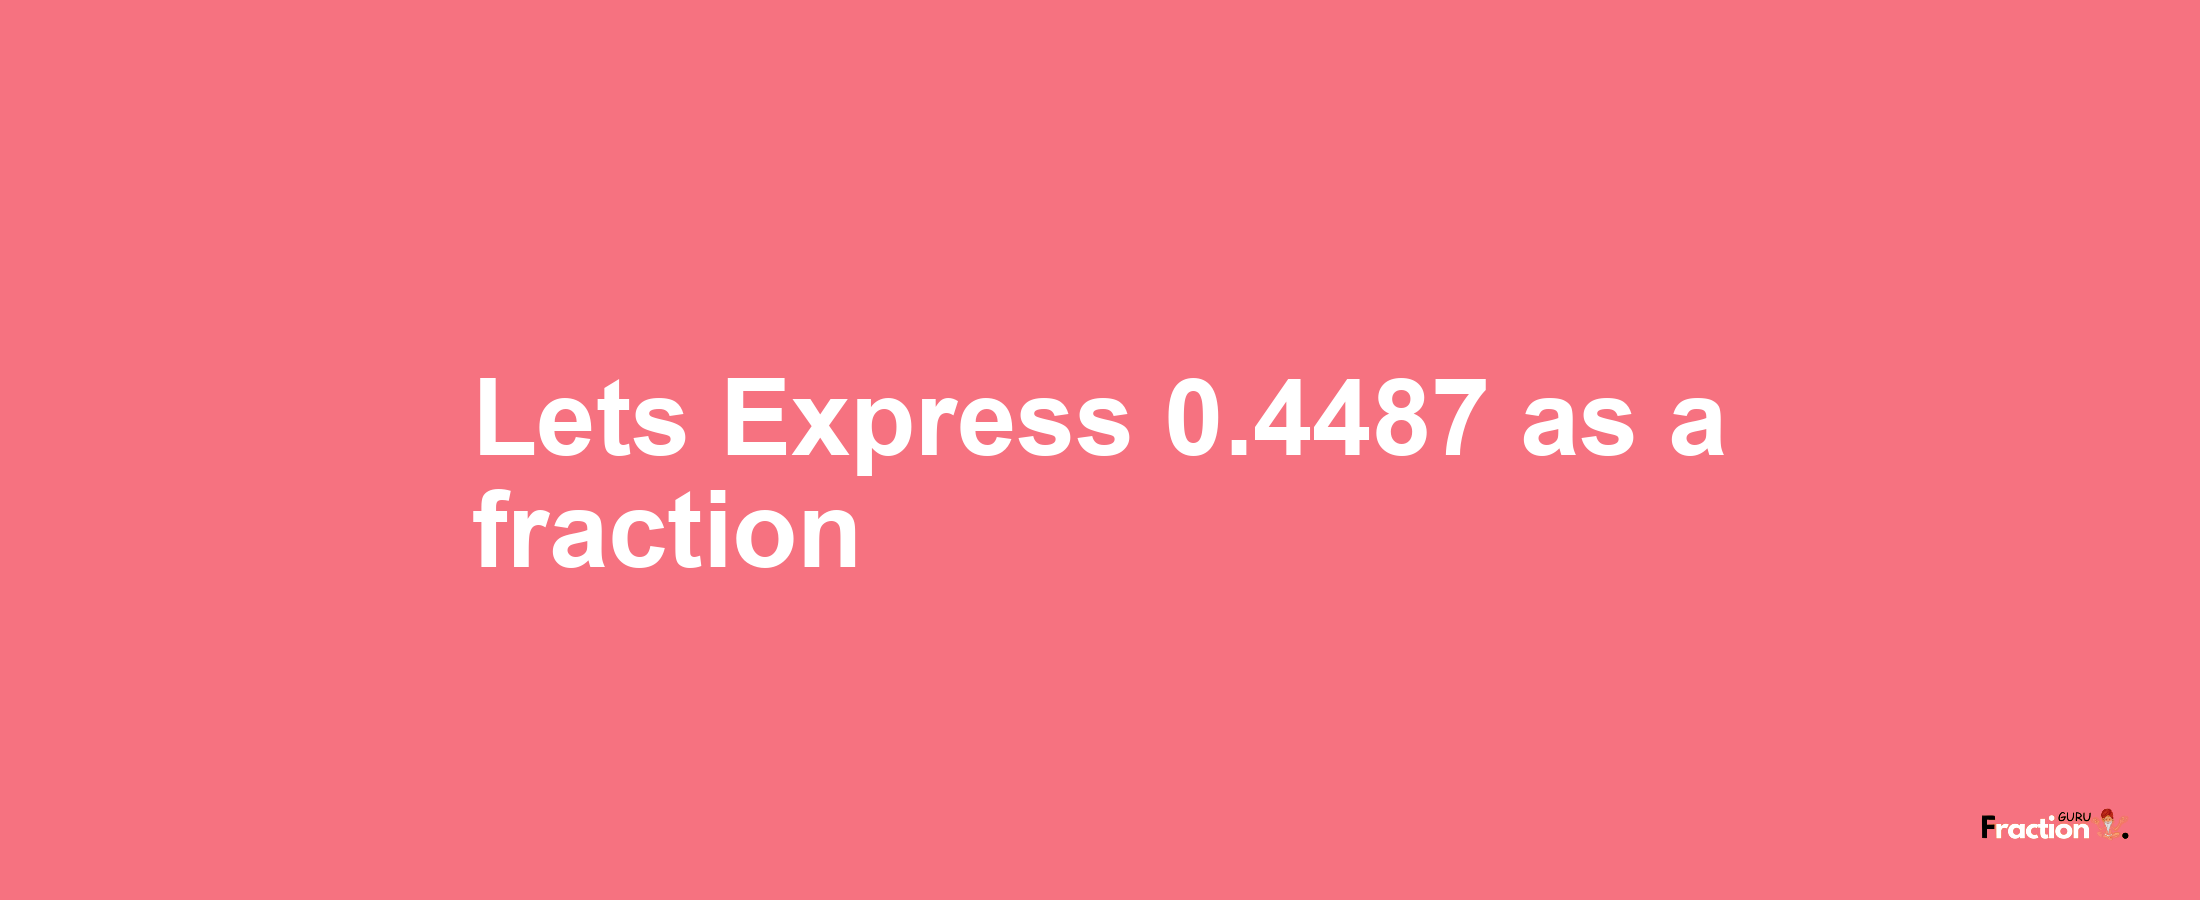 Lets Express 0.4487 as afraction